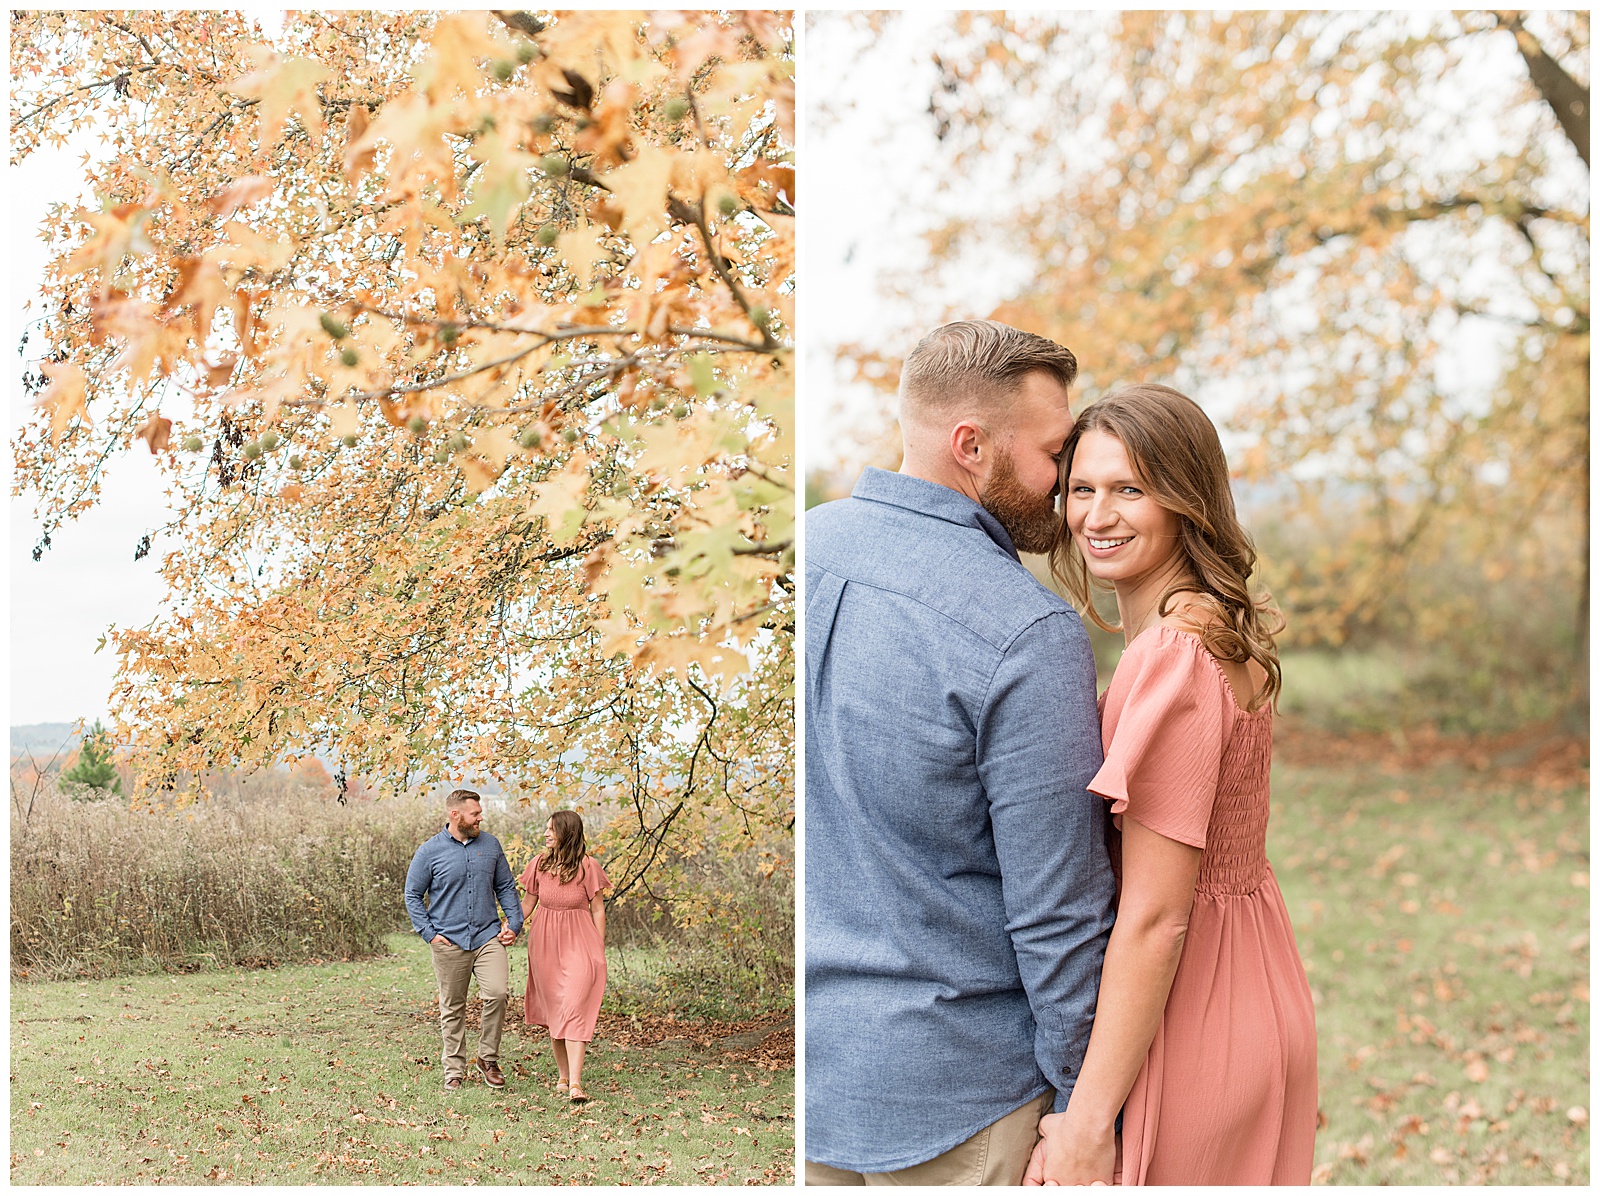 couple holding hands as girl looks back at camera smiling as guy rests his forehead against her right temple on fall day